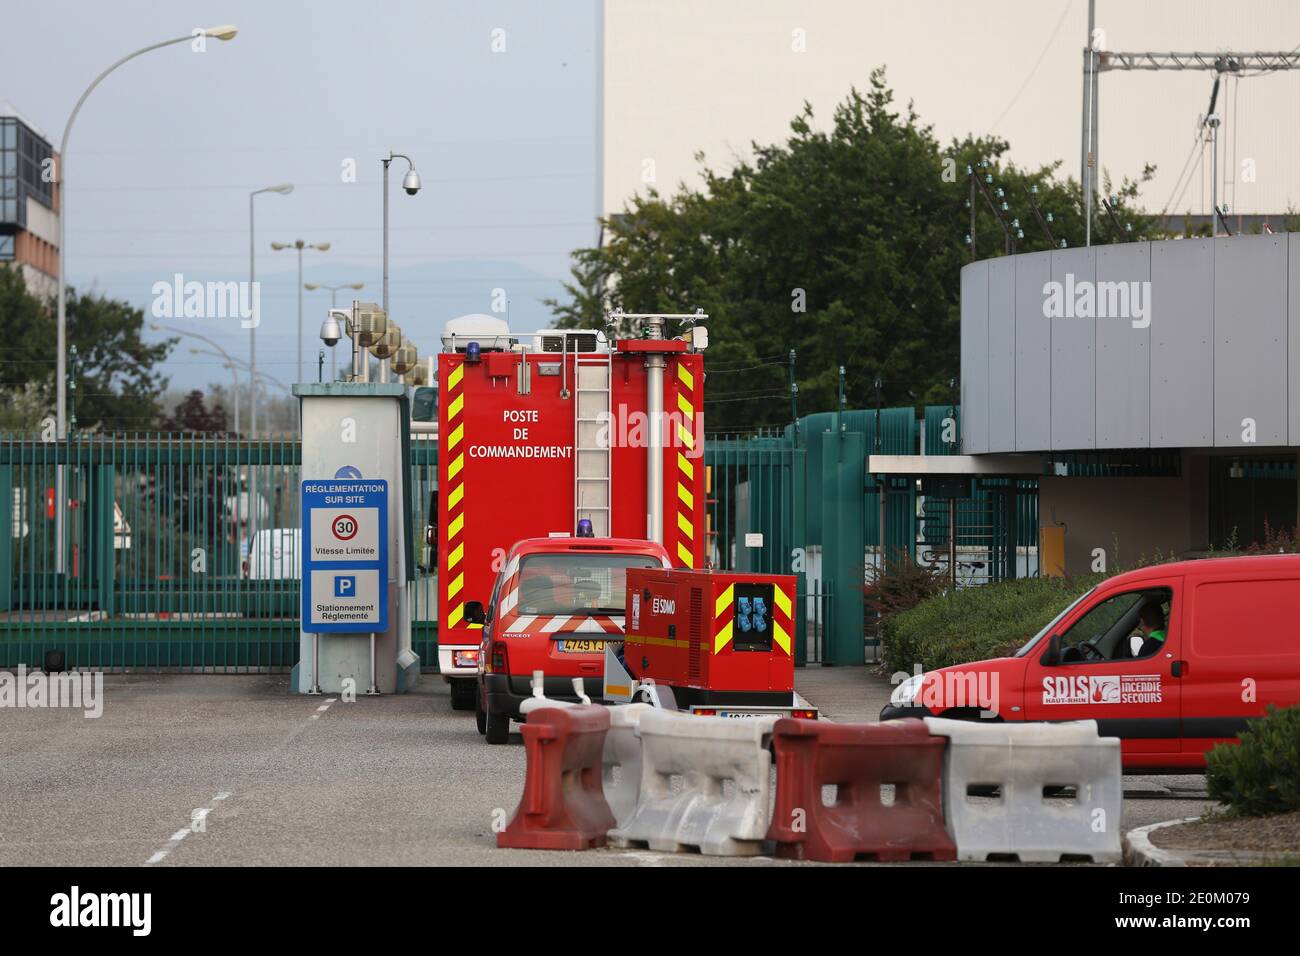 Trucks of French firefighters arrive at Fessenheim nuclear powerplant in Fessenheim, eastern France, on September 5, 2012 after chemical products leaked. Two persons were slightly burnt through their gloves, after an incident with manipulating chemical products, and not owed to fire in the France's oldest nuclear power plant. Photo by Jean-Francois Badias/ABACAPRESS.COM Stock Photo